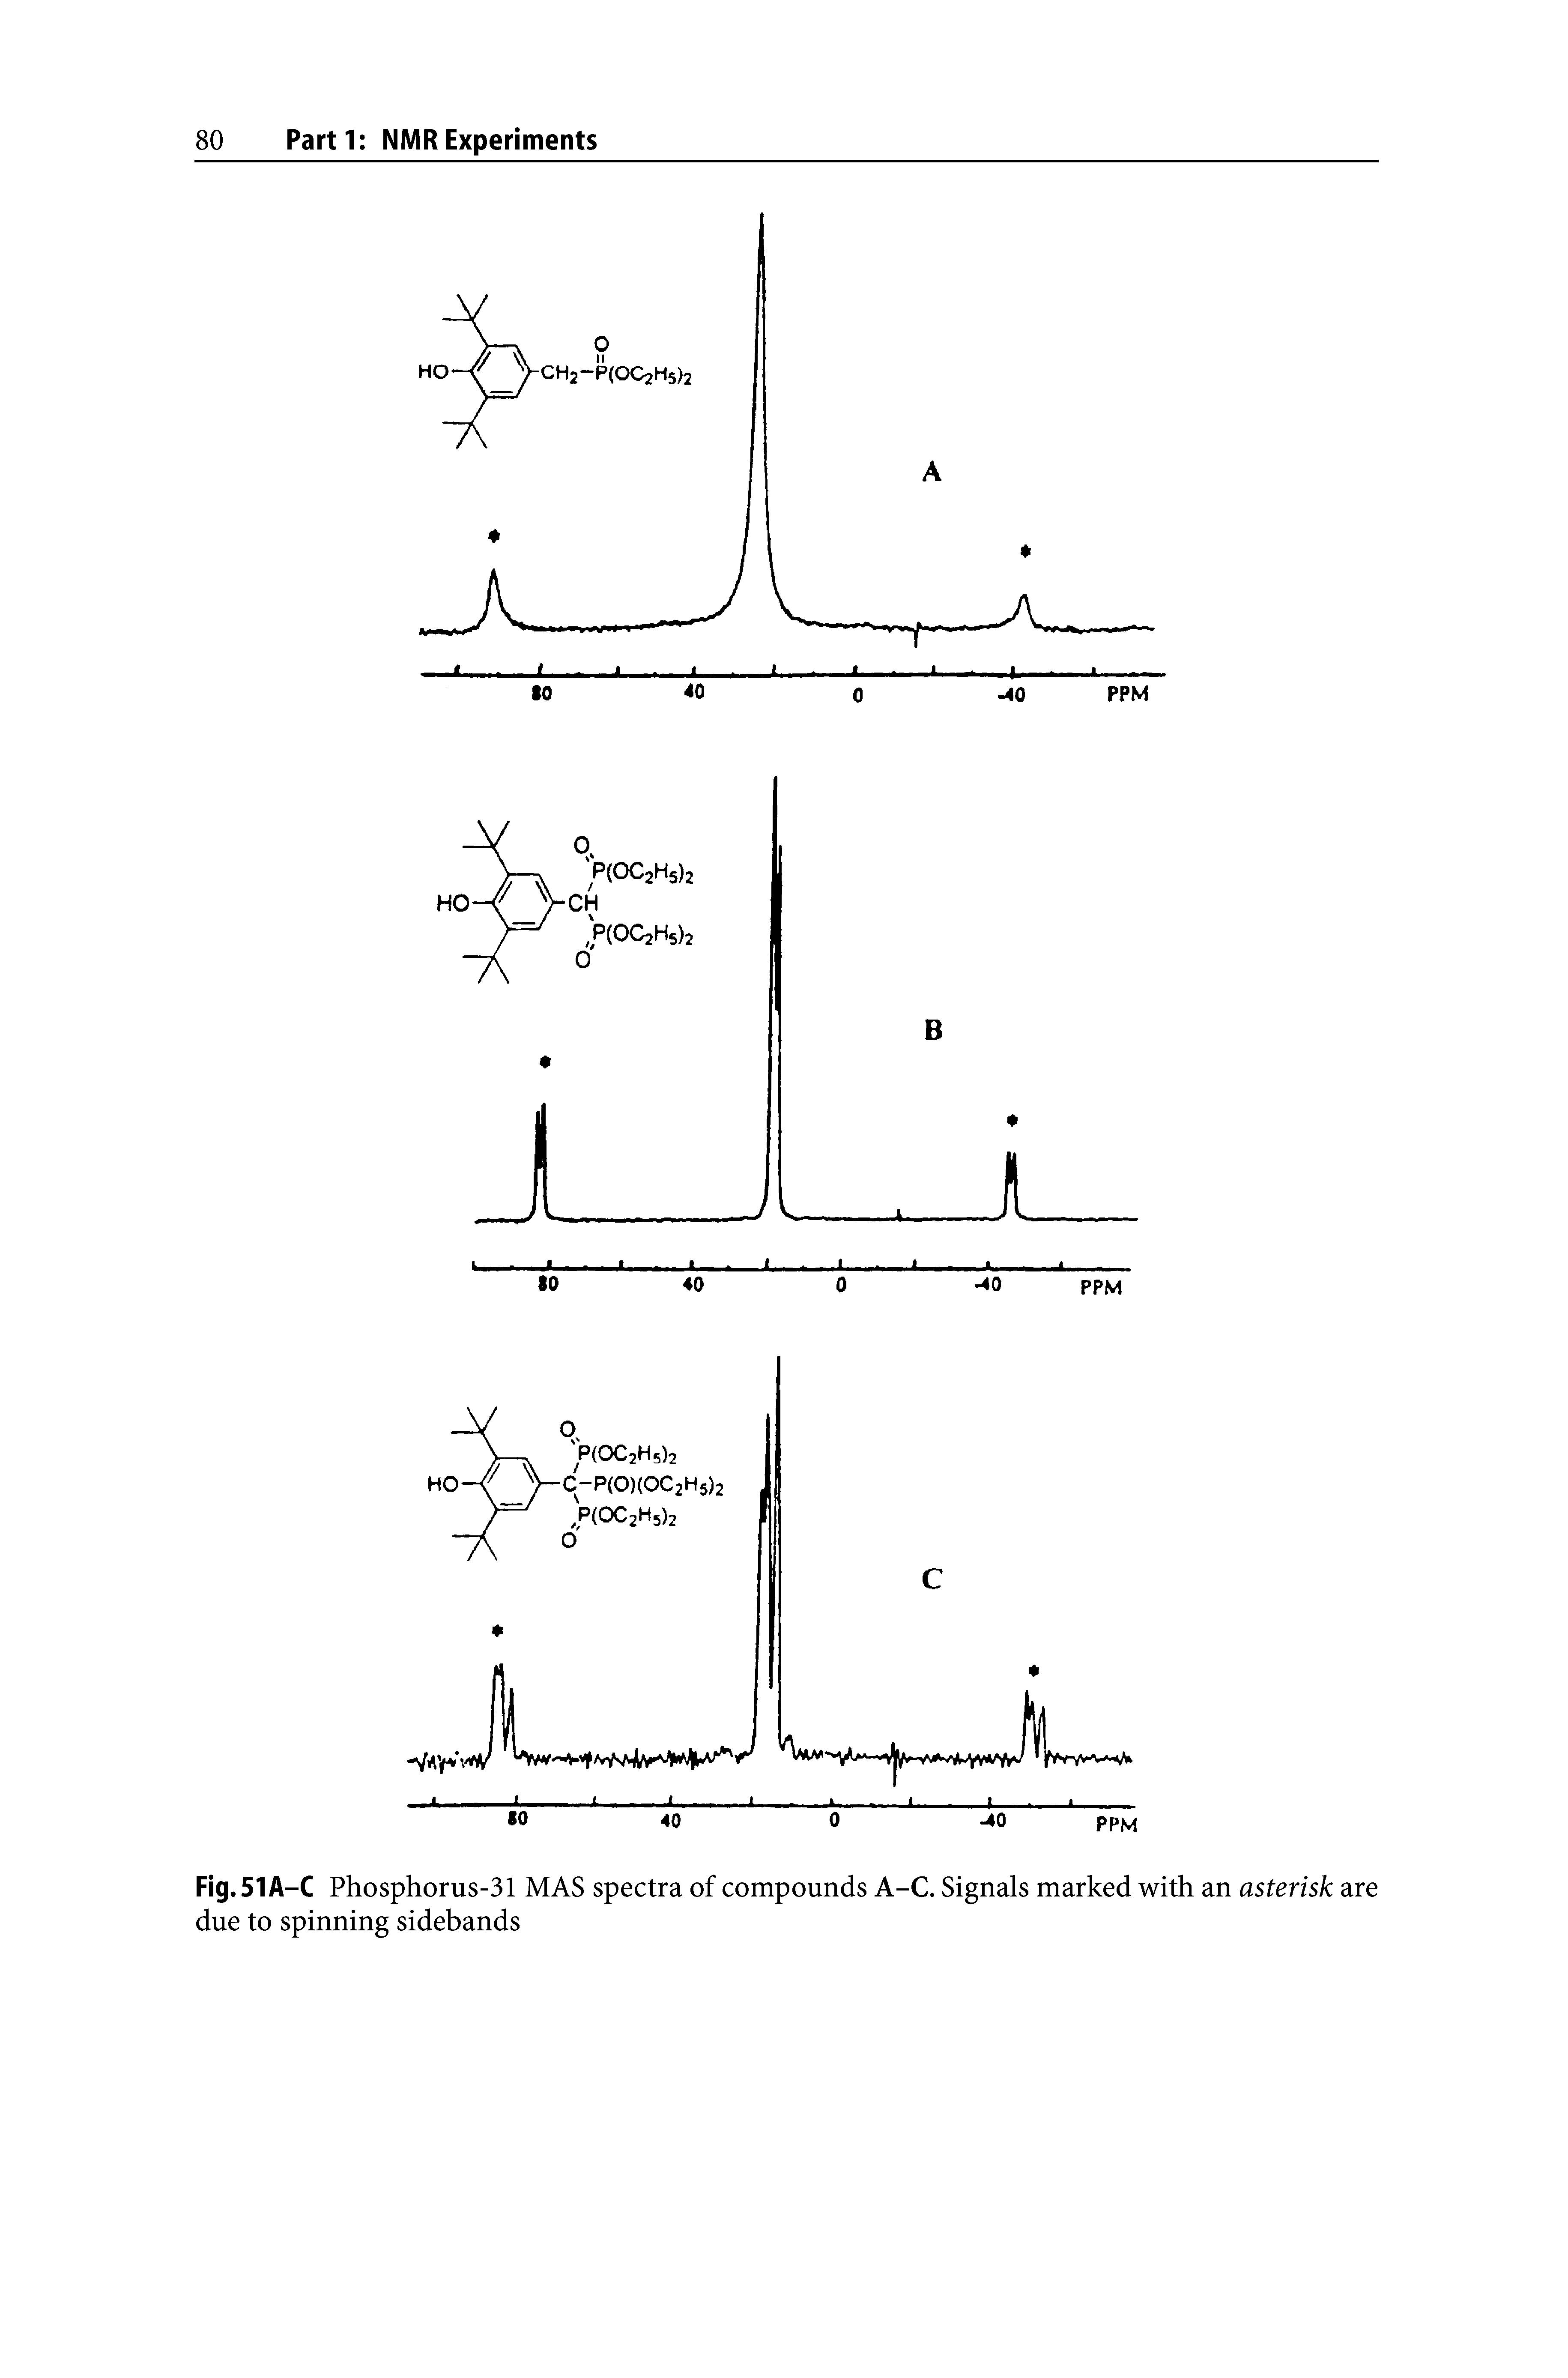 Fig. 51 A—C Phosphorus-31 MAS spectra of compounds A-C. Signals marked with an asterisk are due to spinning sidebands...